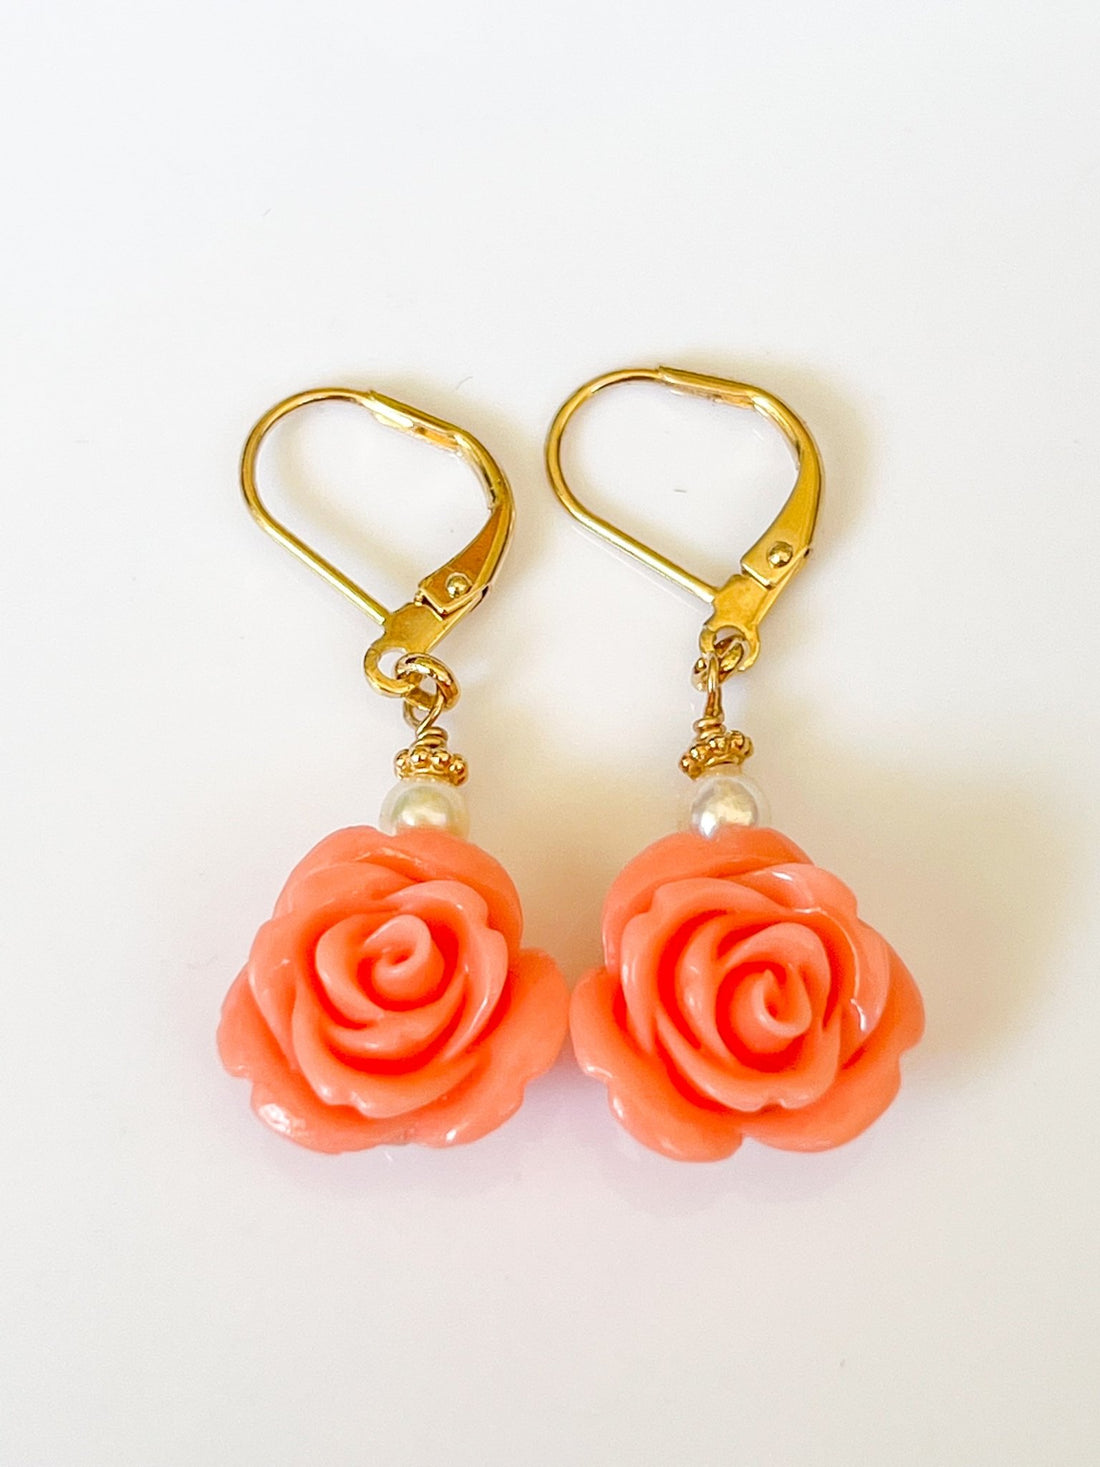 Coral Rose Peking Glass Gold Charm Earrings with Freshwater Pearls by Sage Machado - The Sage Lifestyle